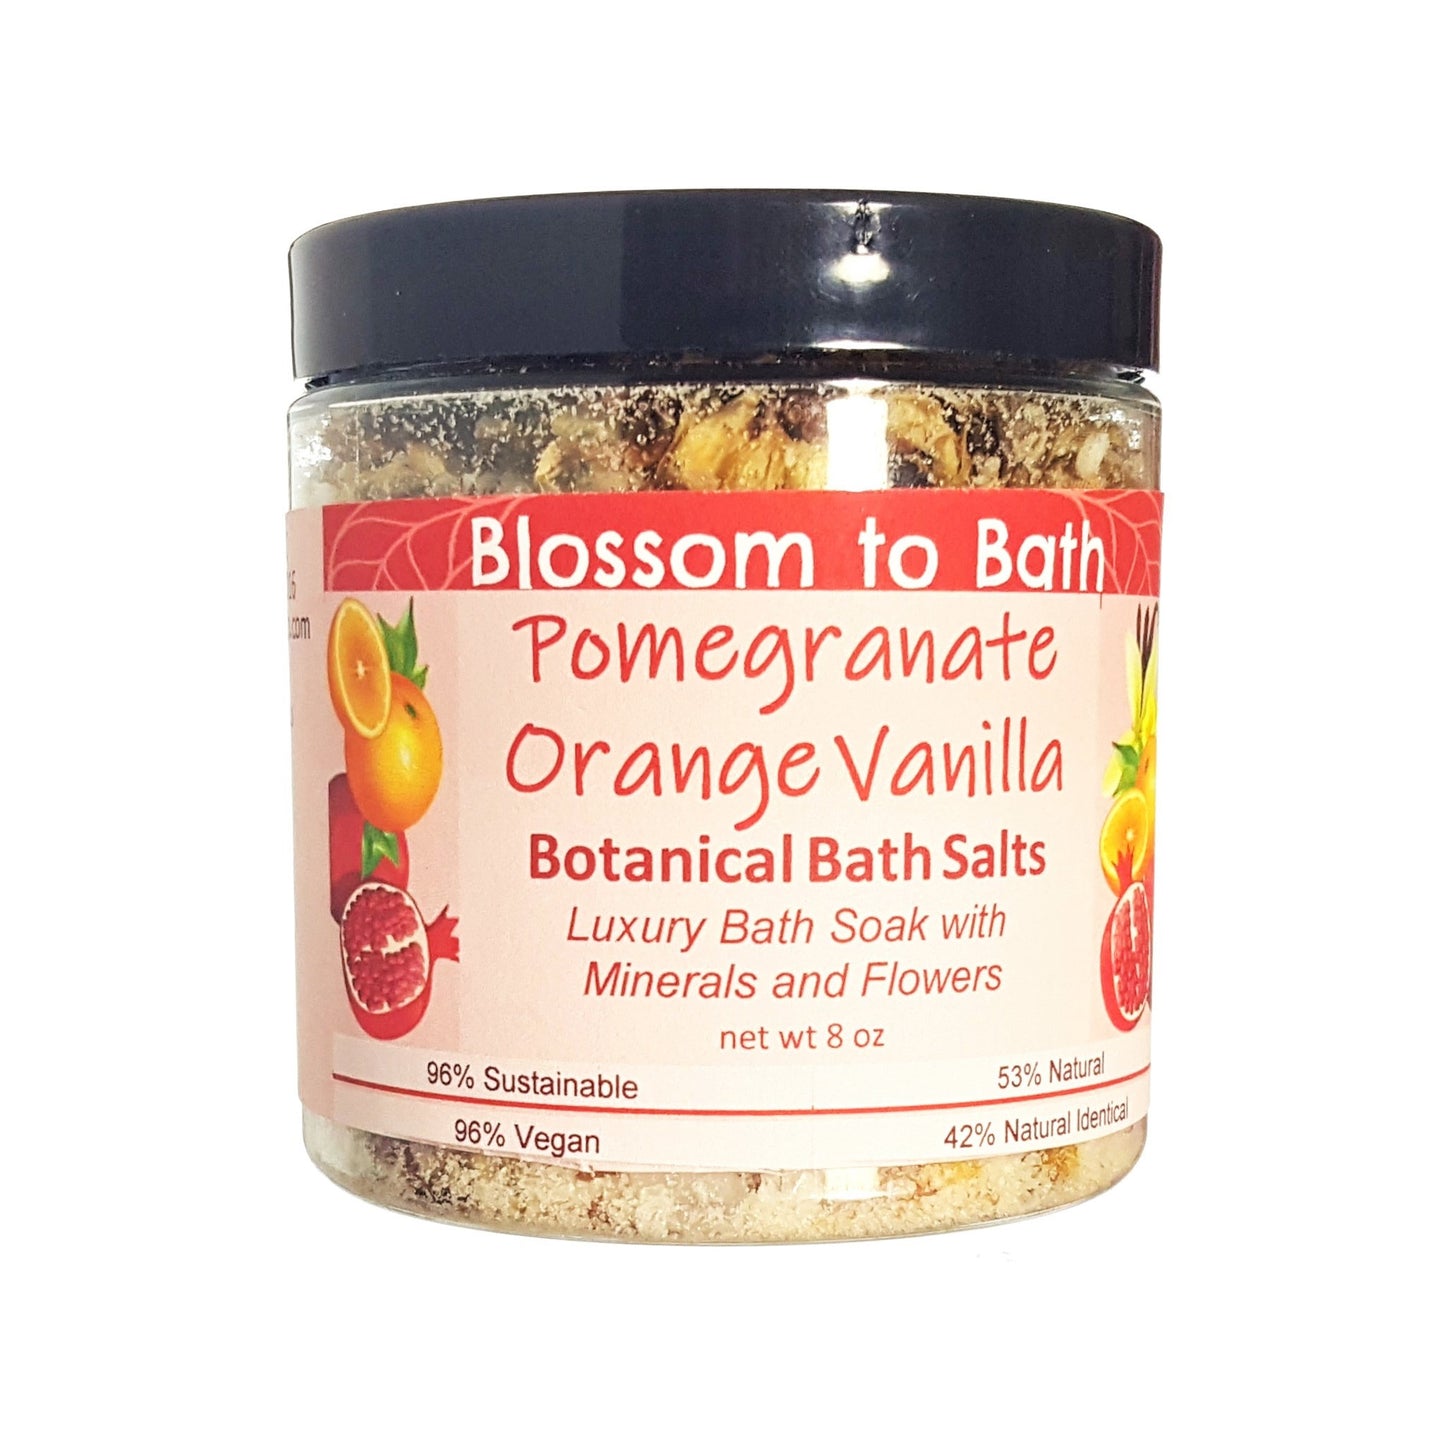 Buy Blossom to Bath Pomegranate Orange Vanilla Botanical Bath Salts from Flowersong Soap Studio.  A hand selected variety of skin loving botanicals and mineral rich salts for a unique, luxurious soaking experience  